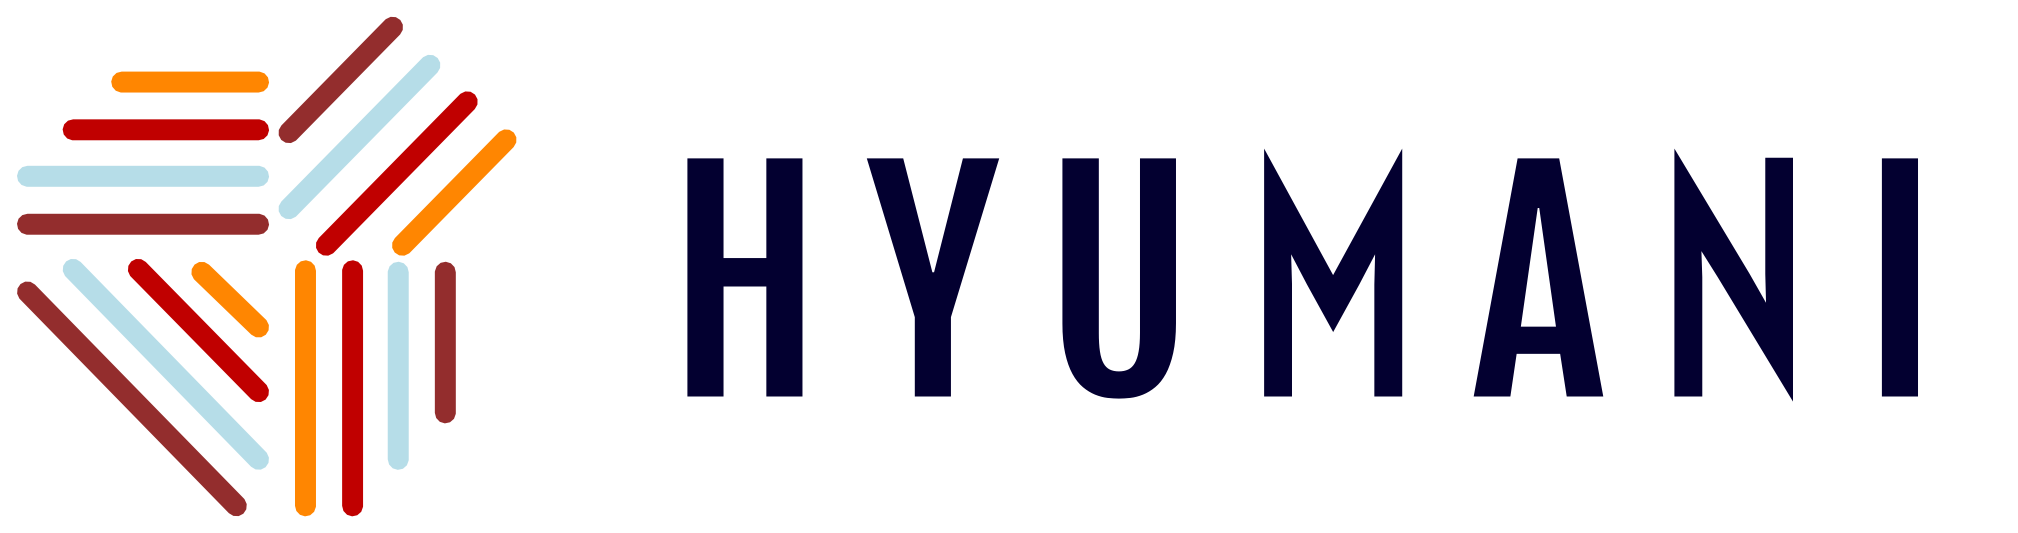 hyumani.com - solution for success in communication using one of 4 decision making styles